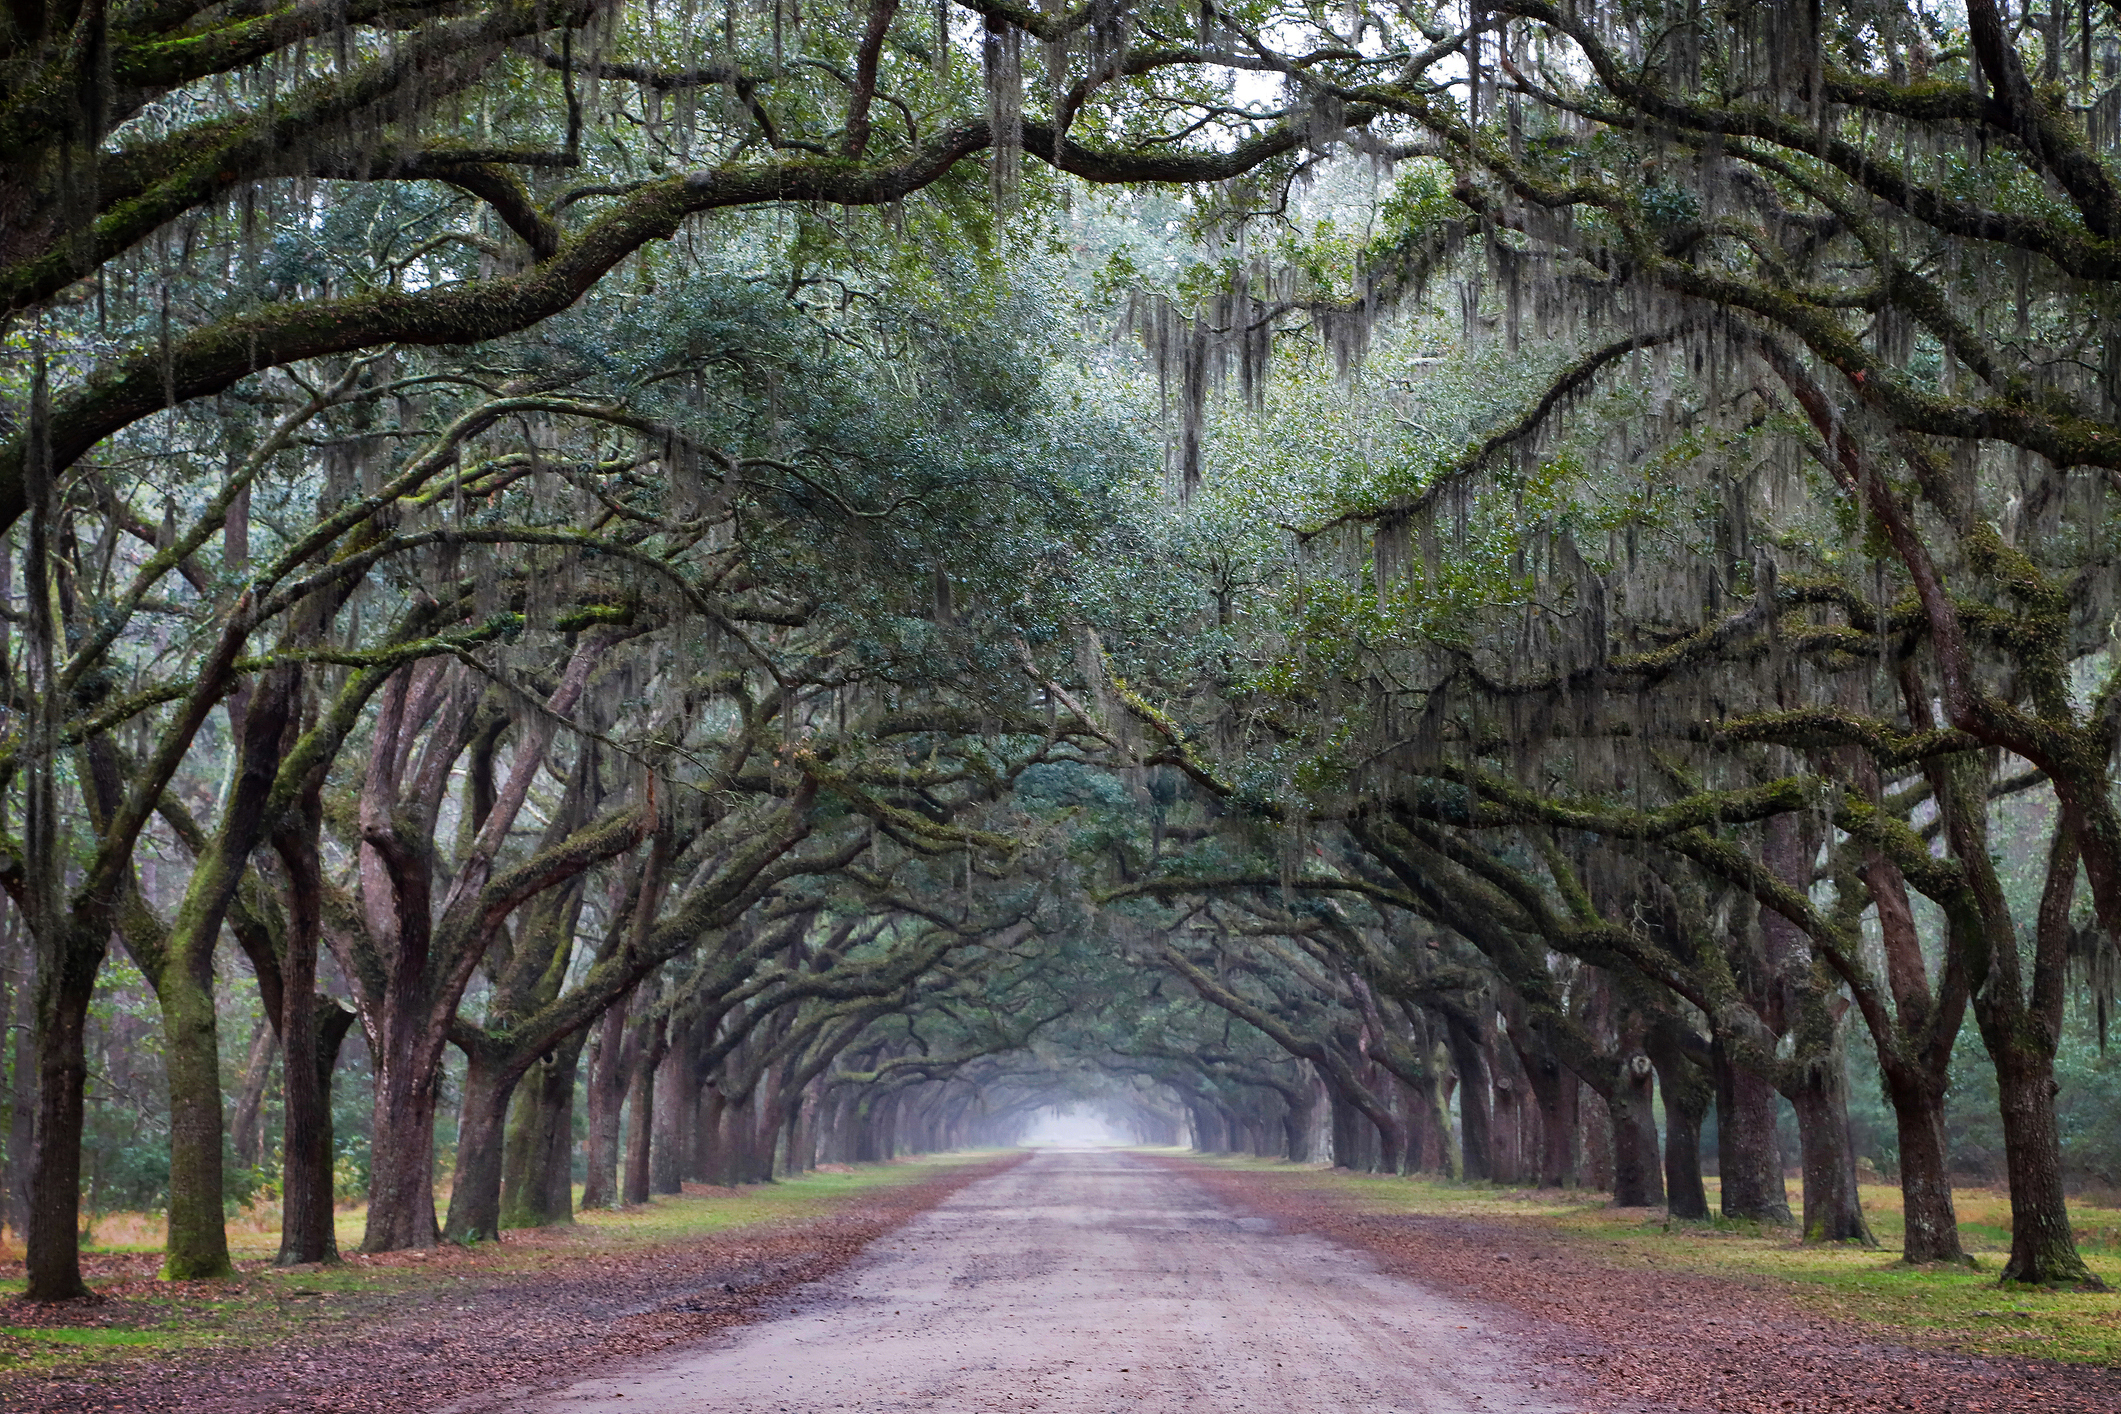 The Wormsloe Historic Site informally known as Wormsloe Plantation is a sta...